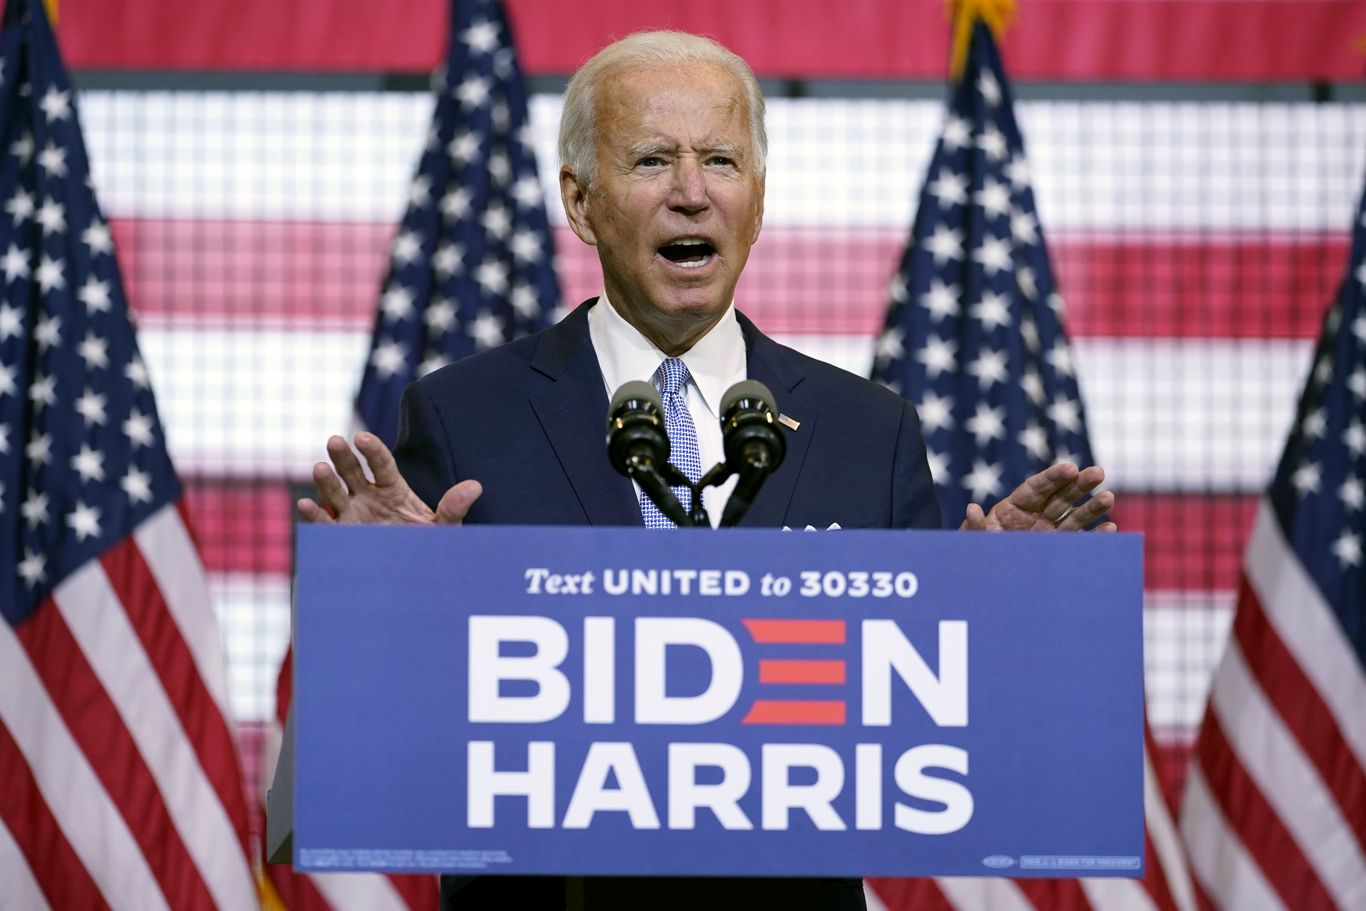 Climate change groups demand Biden ban fossil fuel reps in his admin - Axios